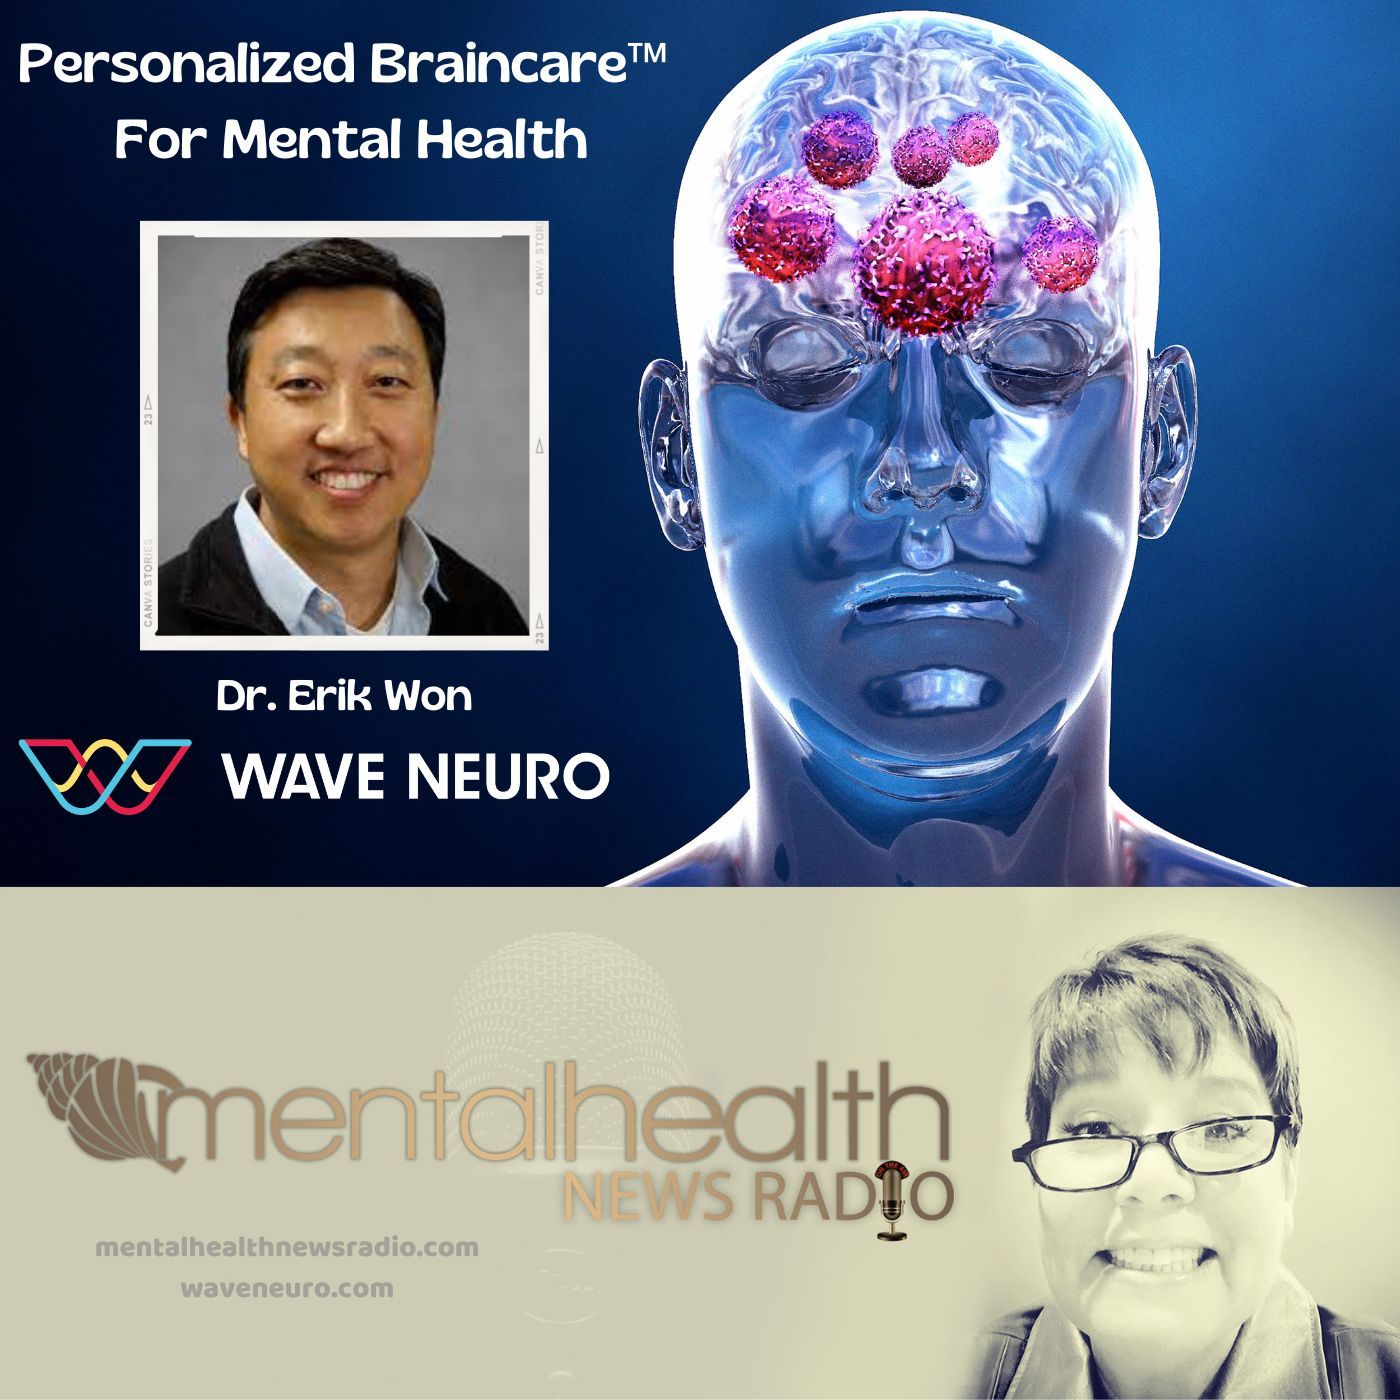 Personalized Braincare™ and Mental Health